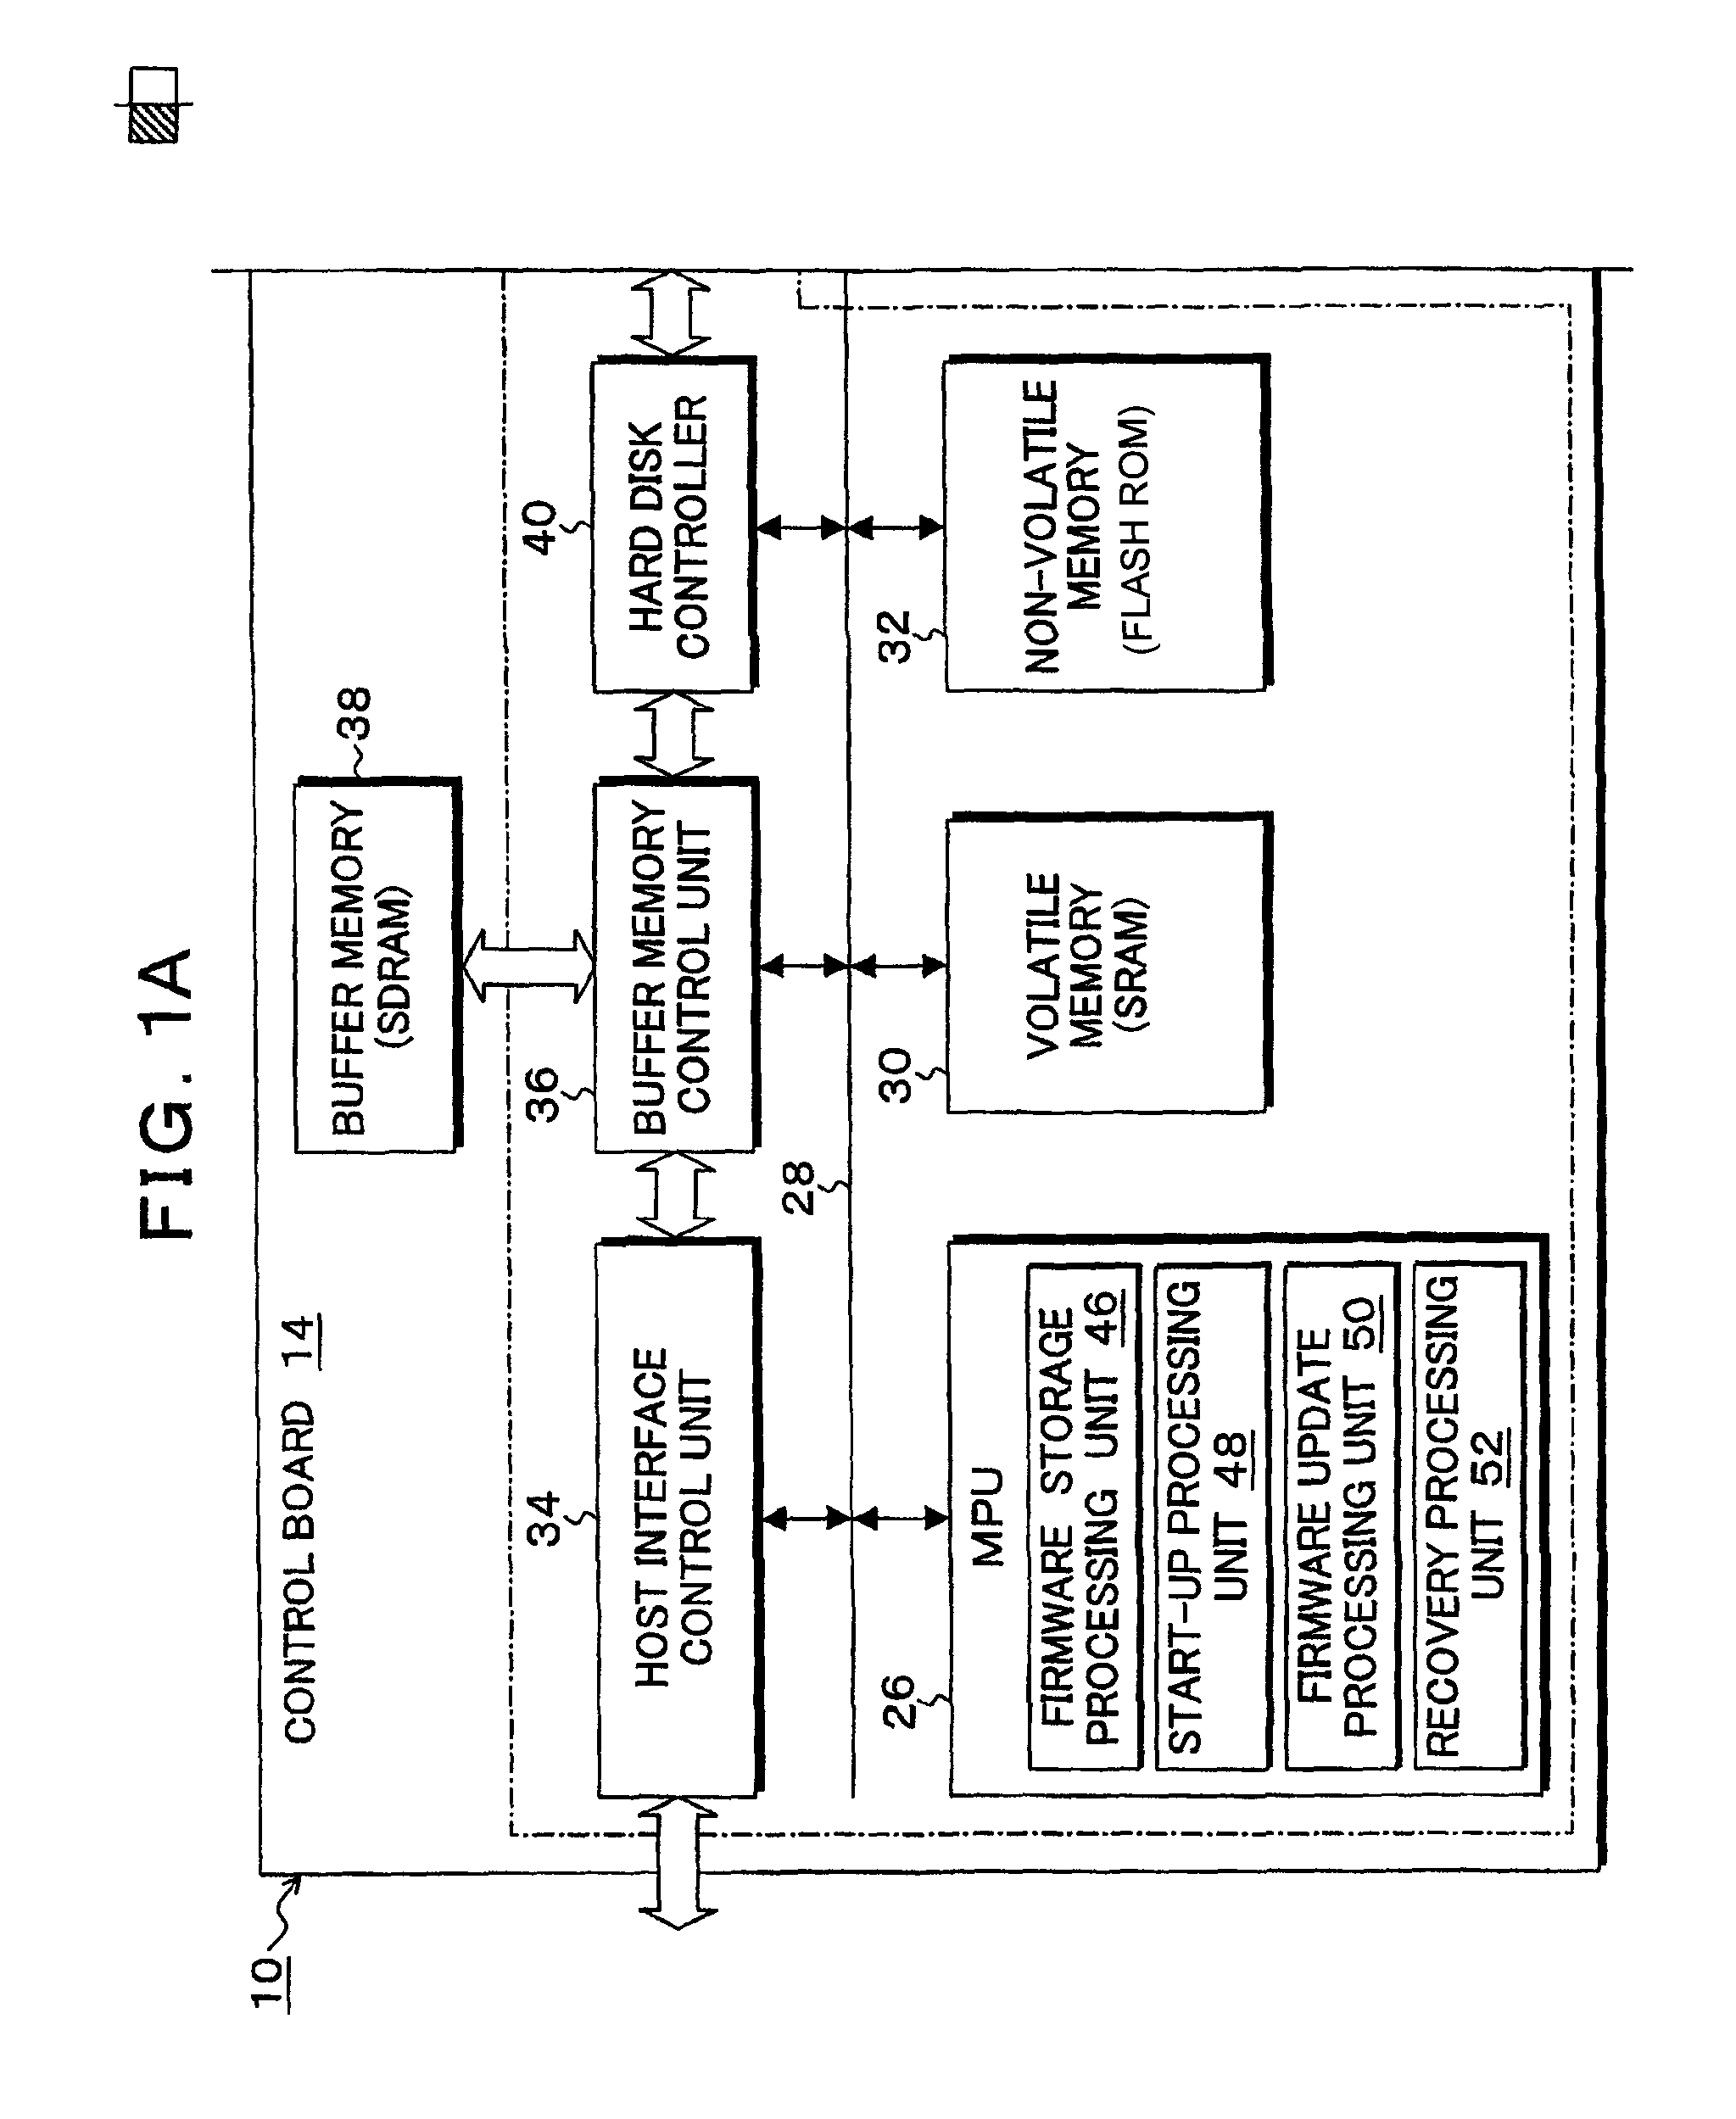 Storage apparatus, control method, and control device which can be reliably started up when power is turned on even after there is an error during firmware update